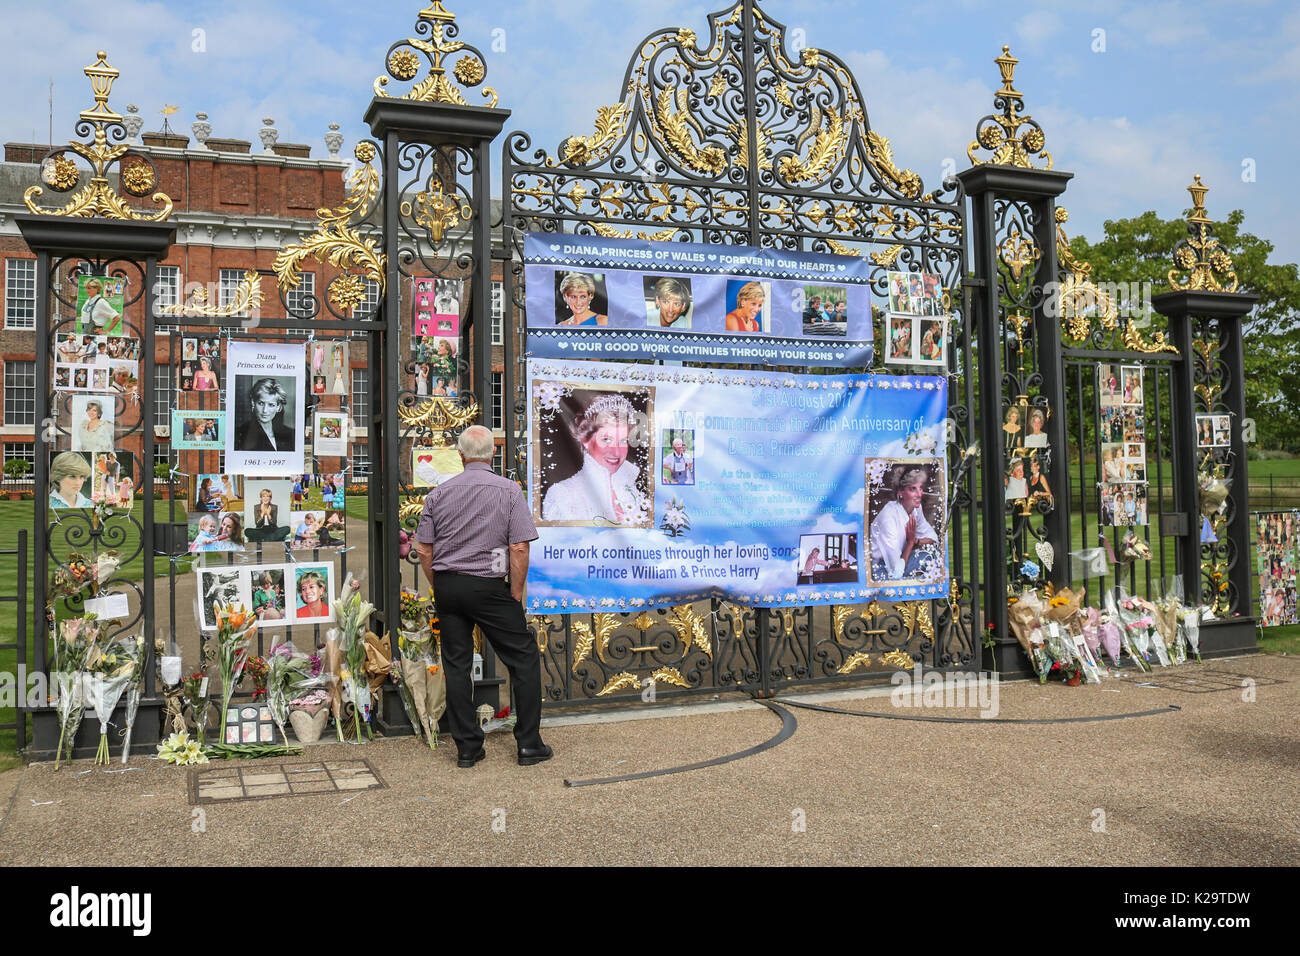 London, UK. 29th Aug, 2017. Members of the public and tourists pay their respect with floral tributes outside Kensington Palace with two days prior to  the 20th anniversary of the death of Diana Princess of Wales who became affectionately known as the People's Princess  was tragically killed in a fatal car accident in Paris on 31st August 1997. Credit: amer ghazzal/Alamy Live News Stock Photo